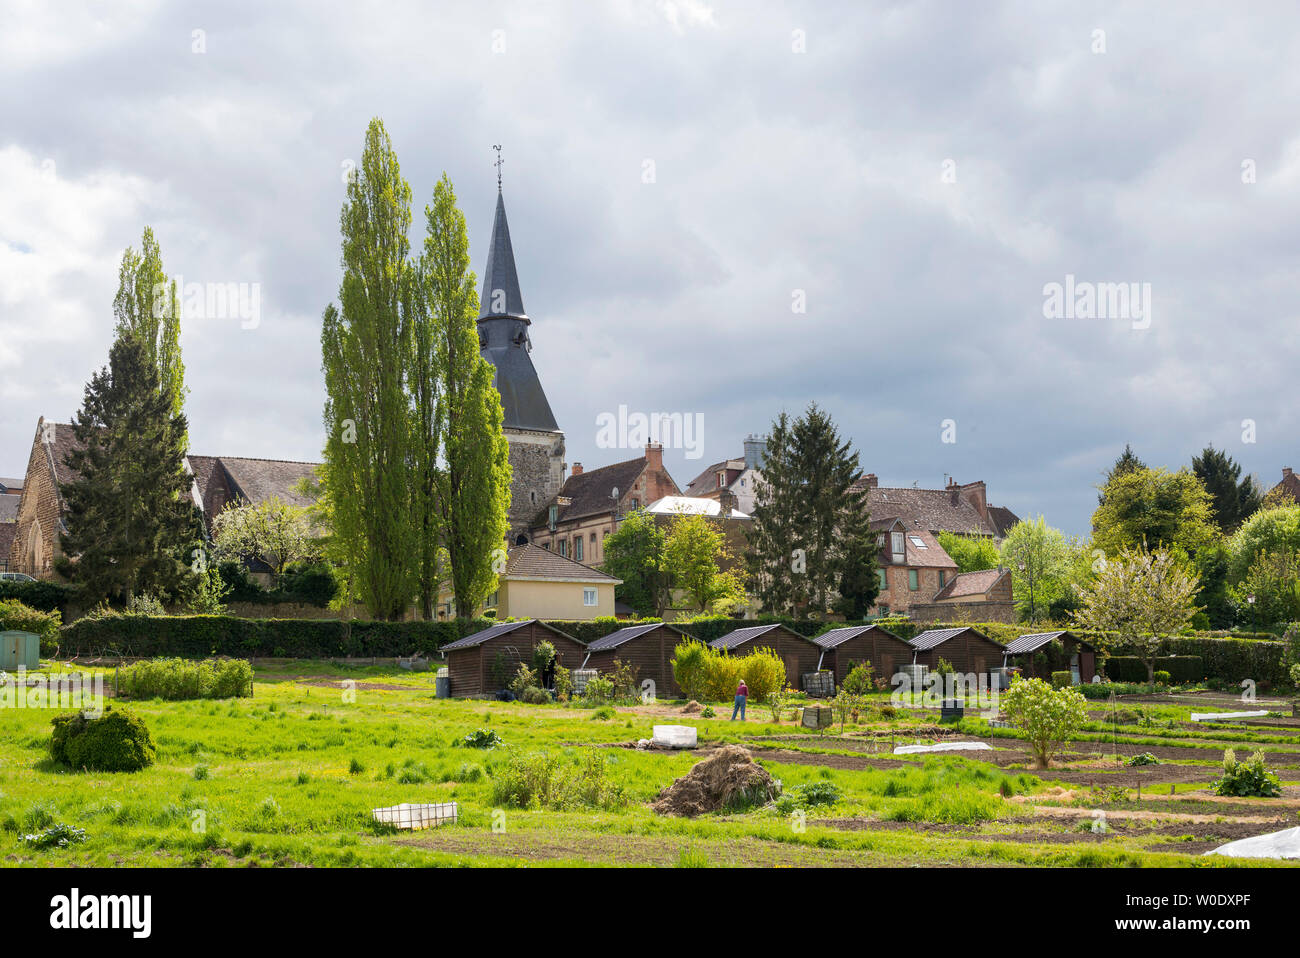 tæmme Van Ruckus allotments located in L'Aigle, Orne, Normandy, France Stock Photo - Alamy